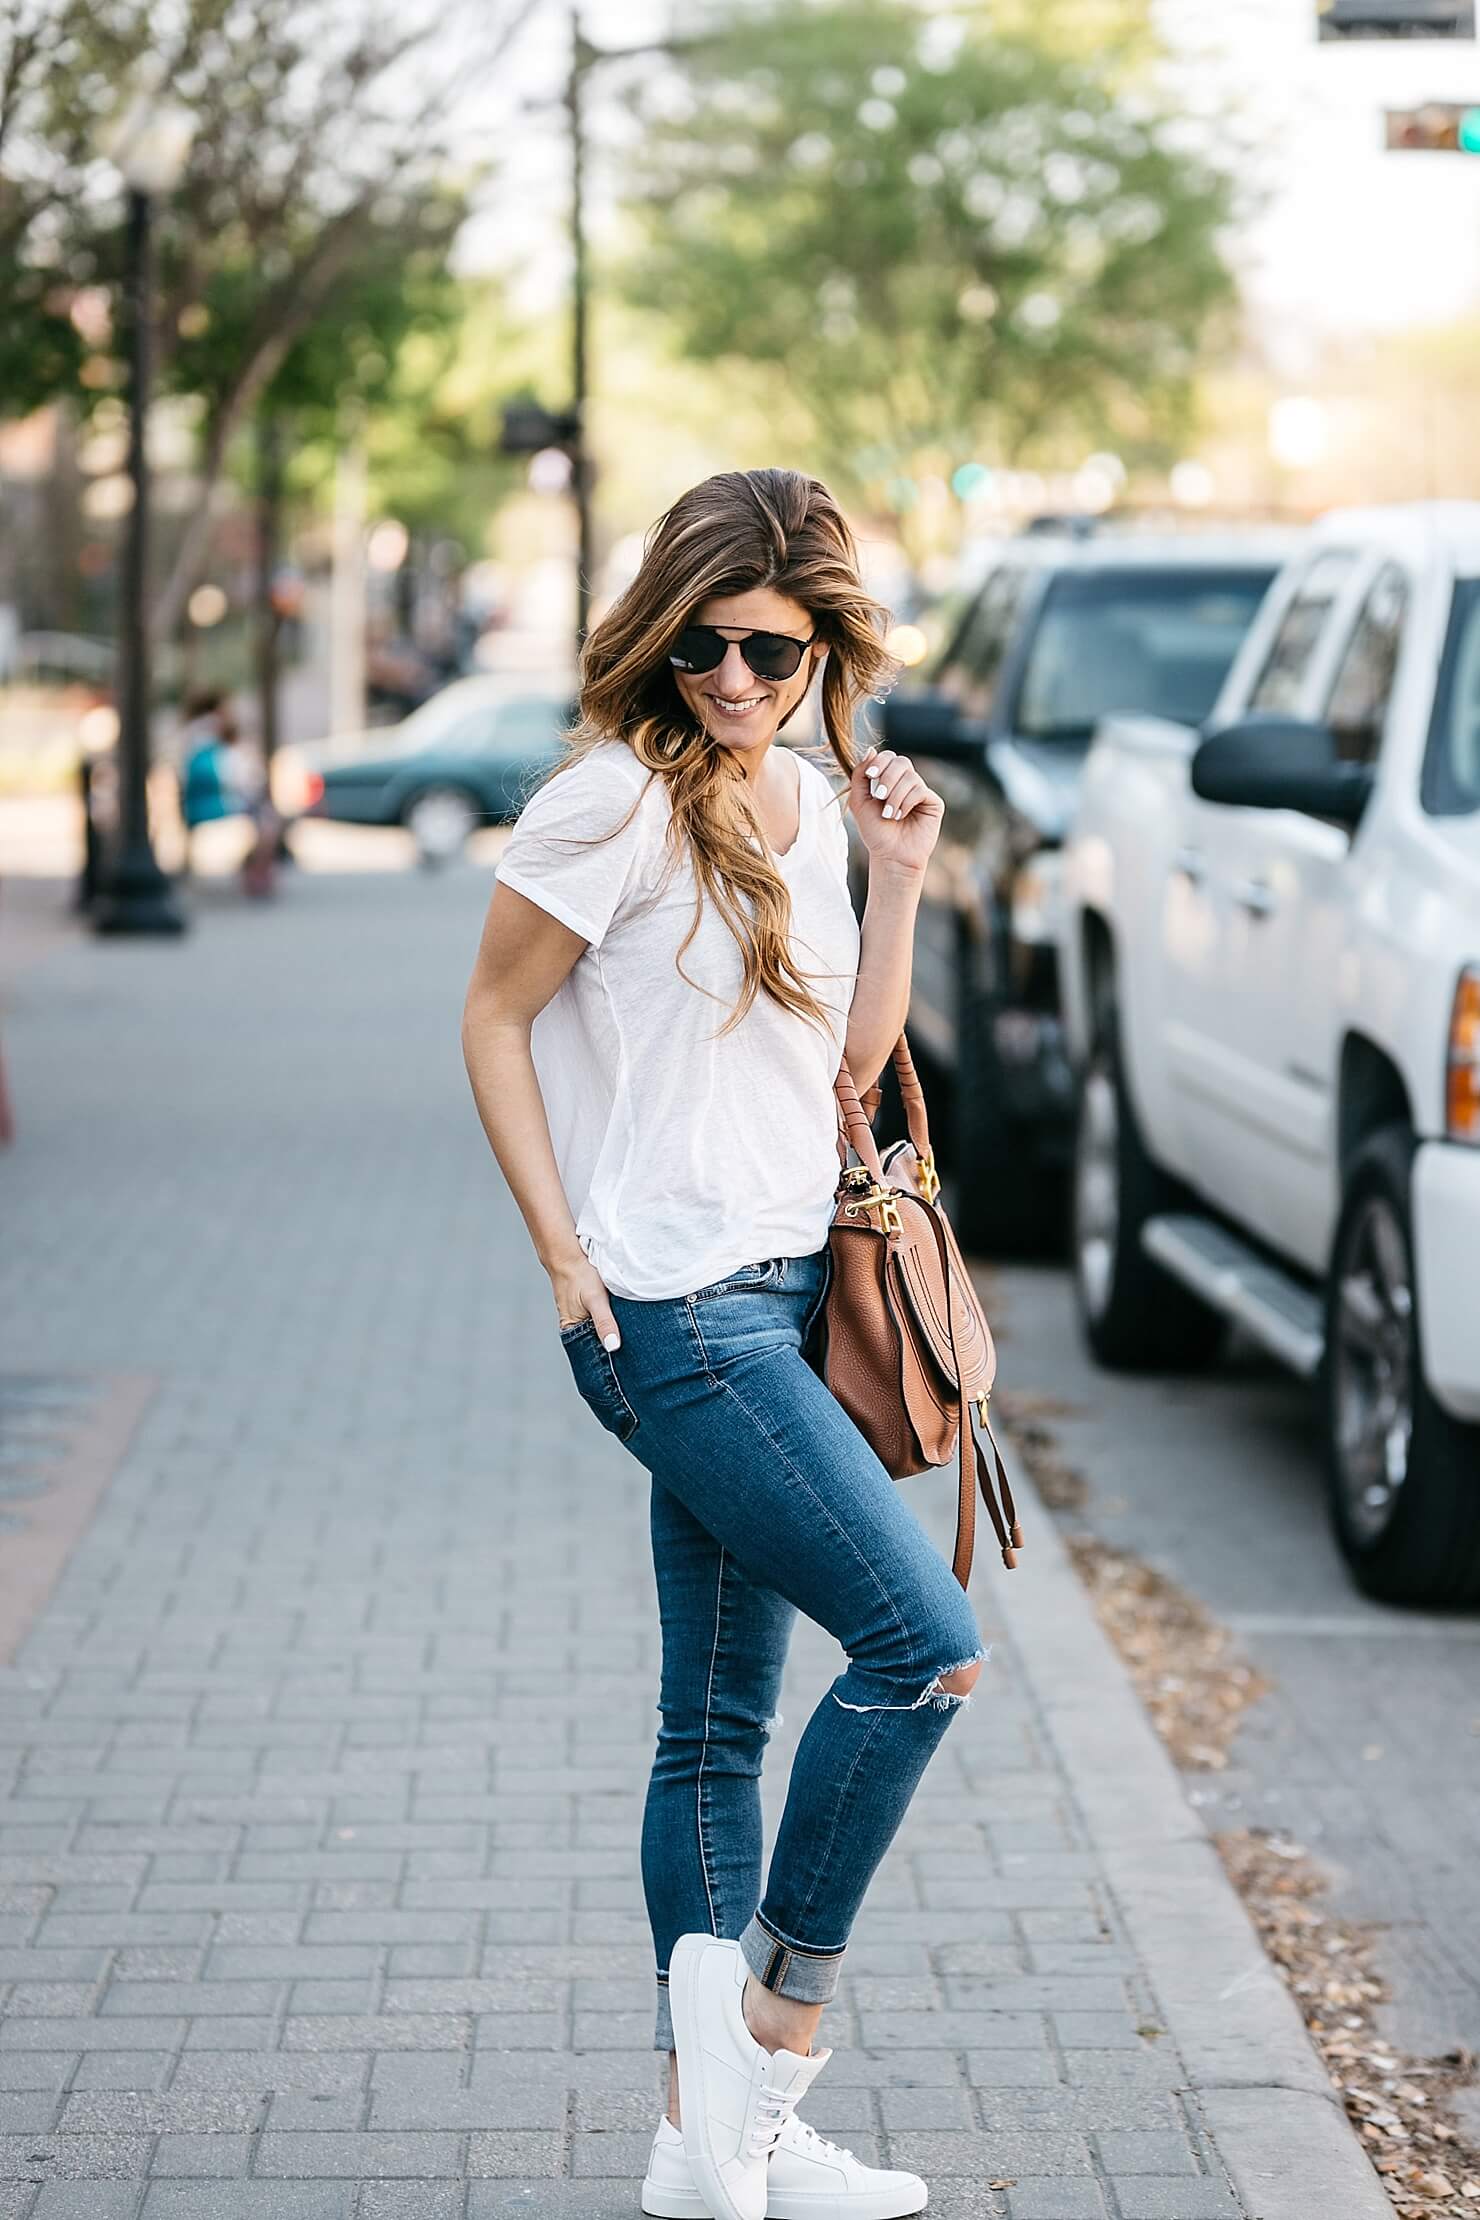 What to wear to a baseball game: Casual Chic Denim & Sneakers